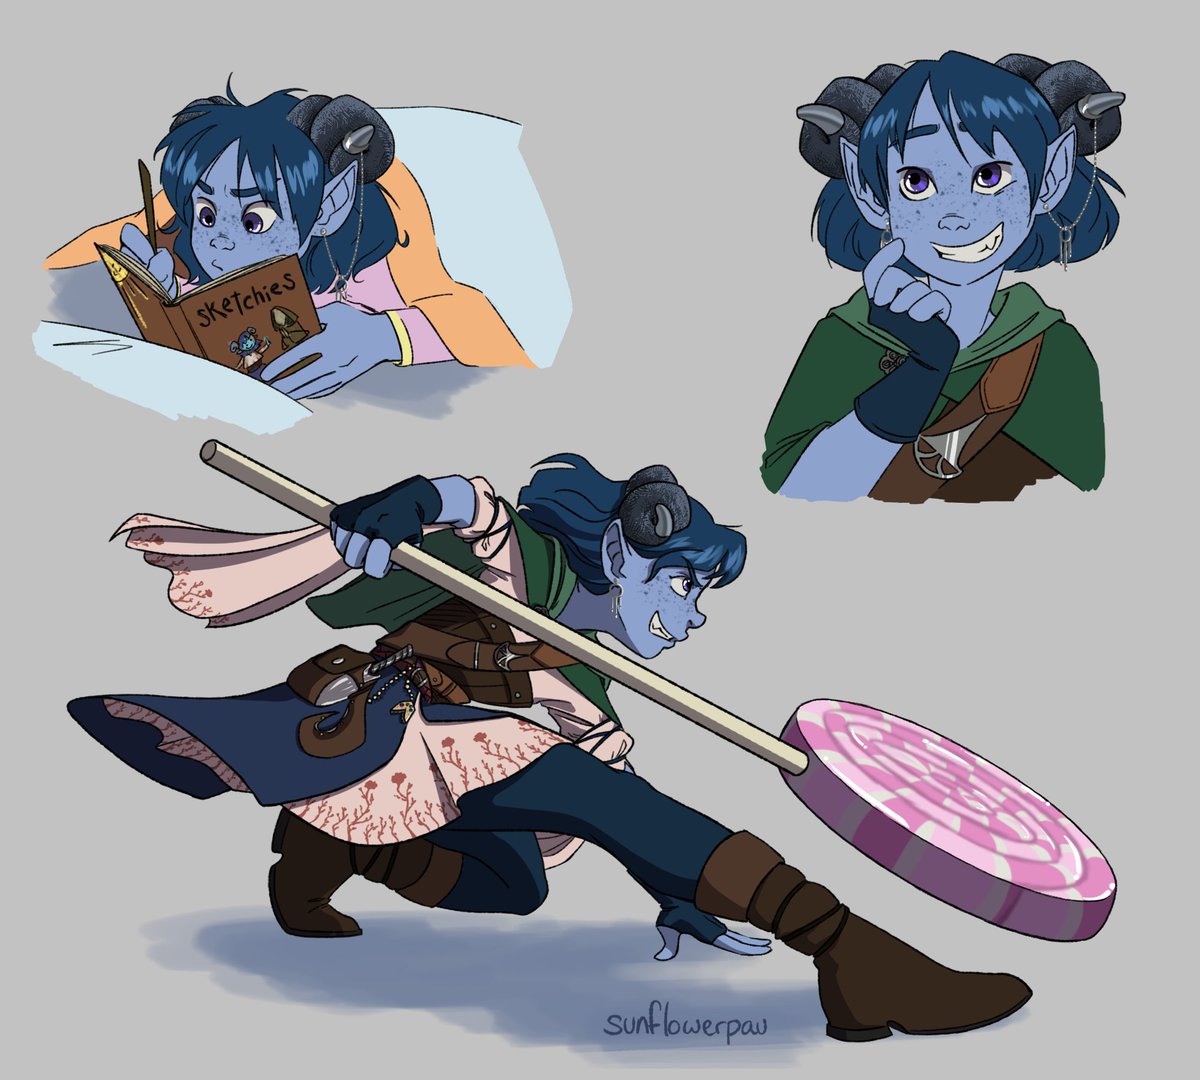 so i recently started watching critical role and jester has my entire heart...